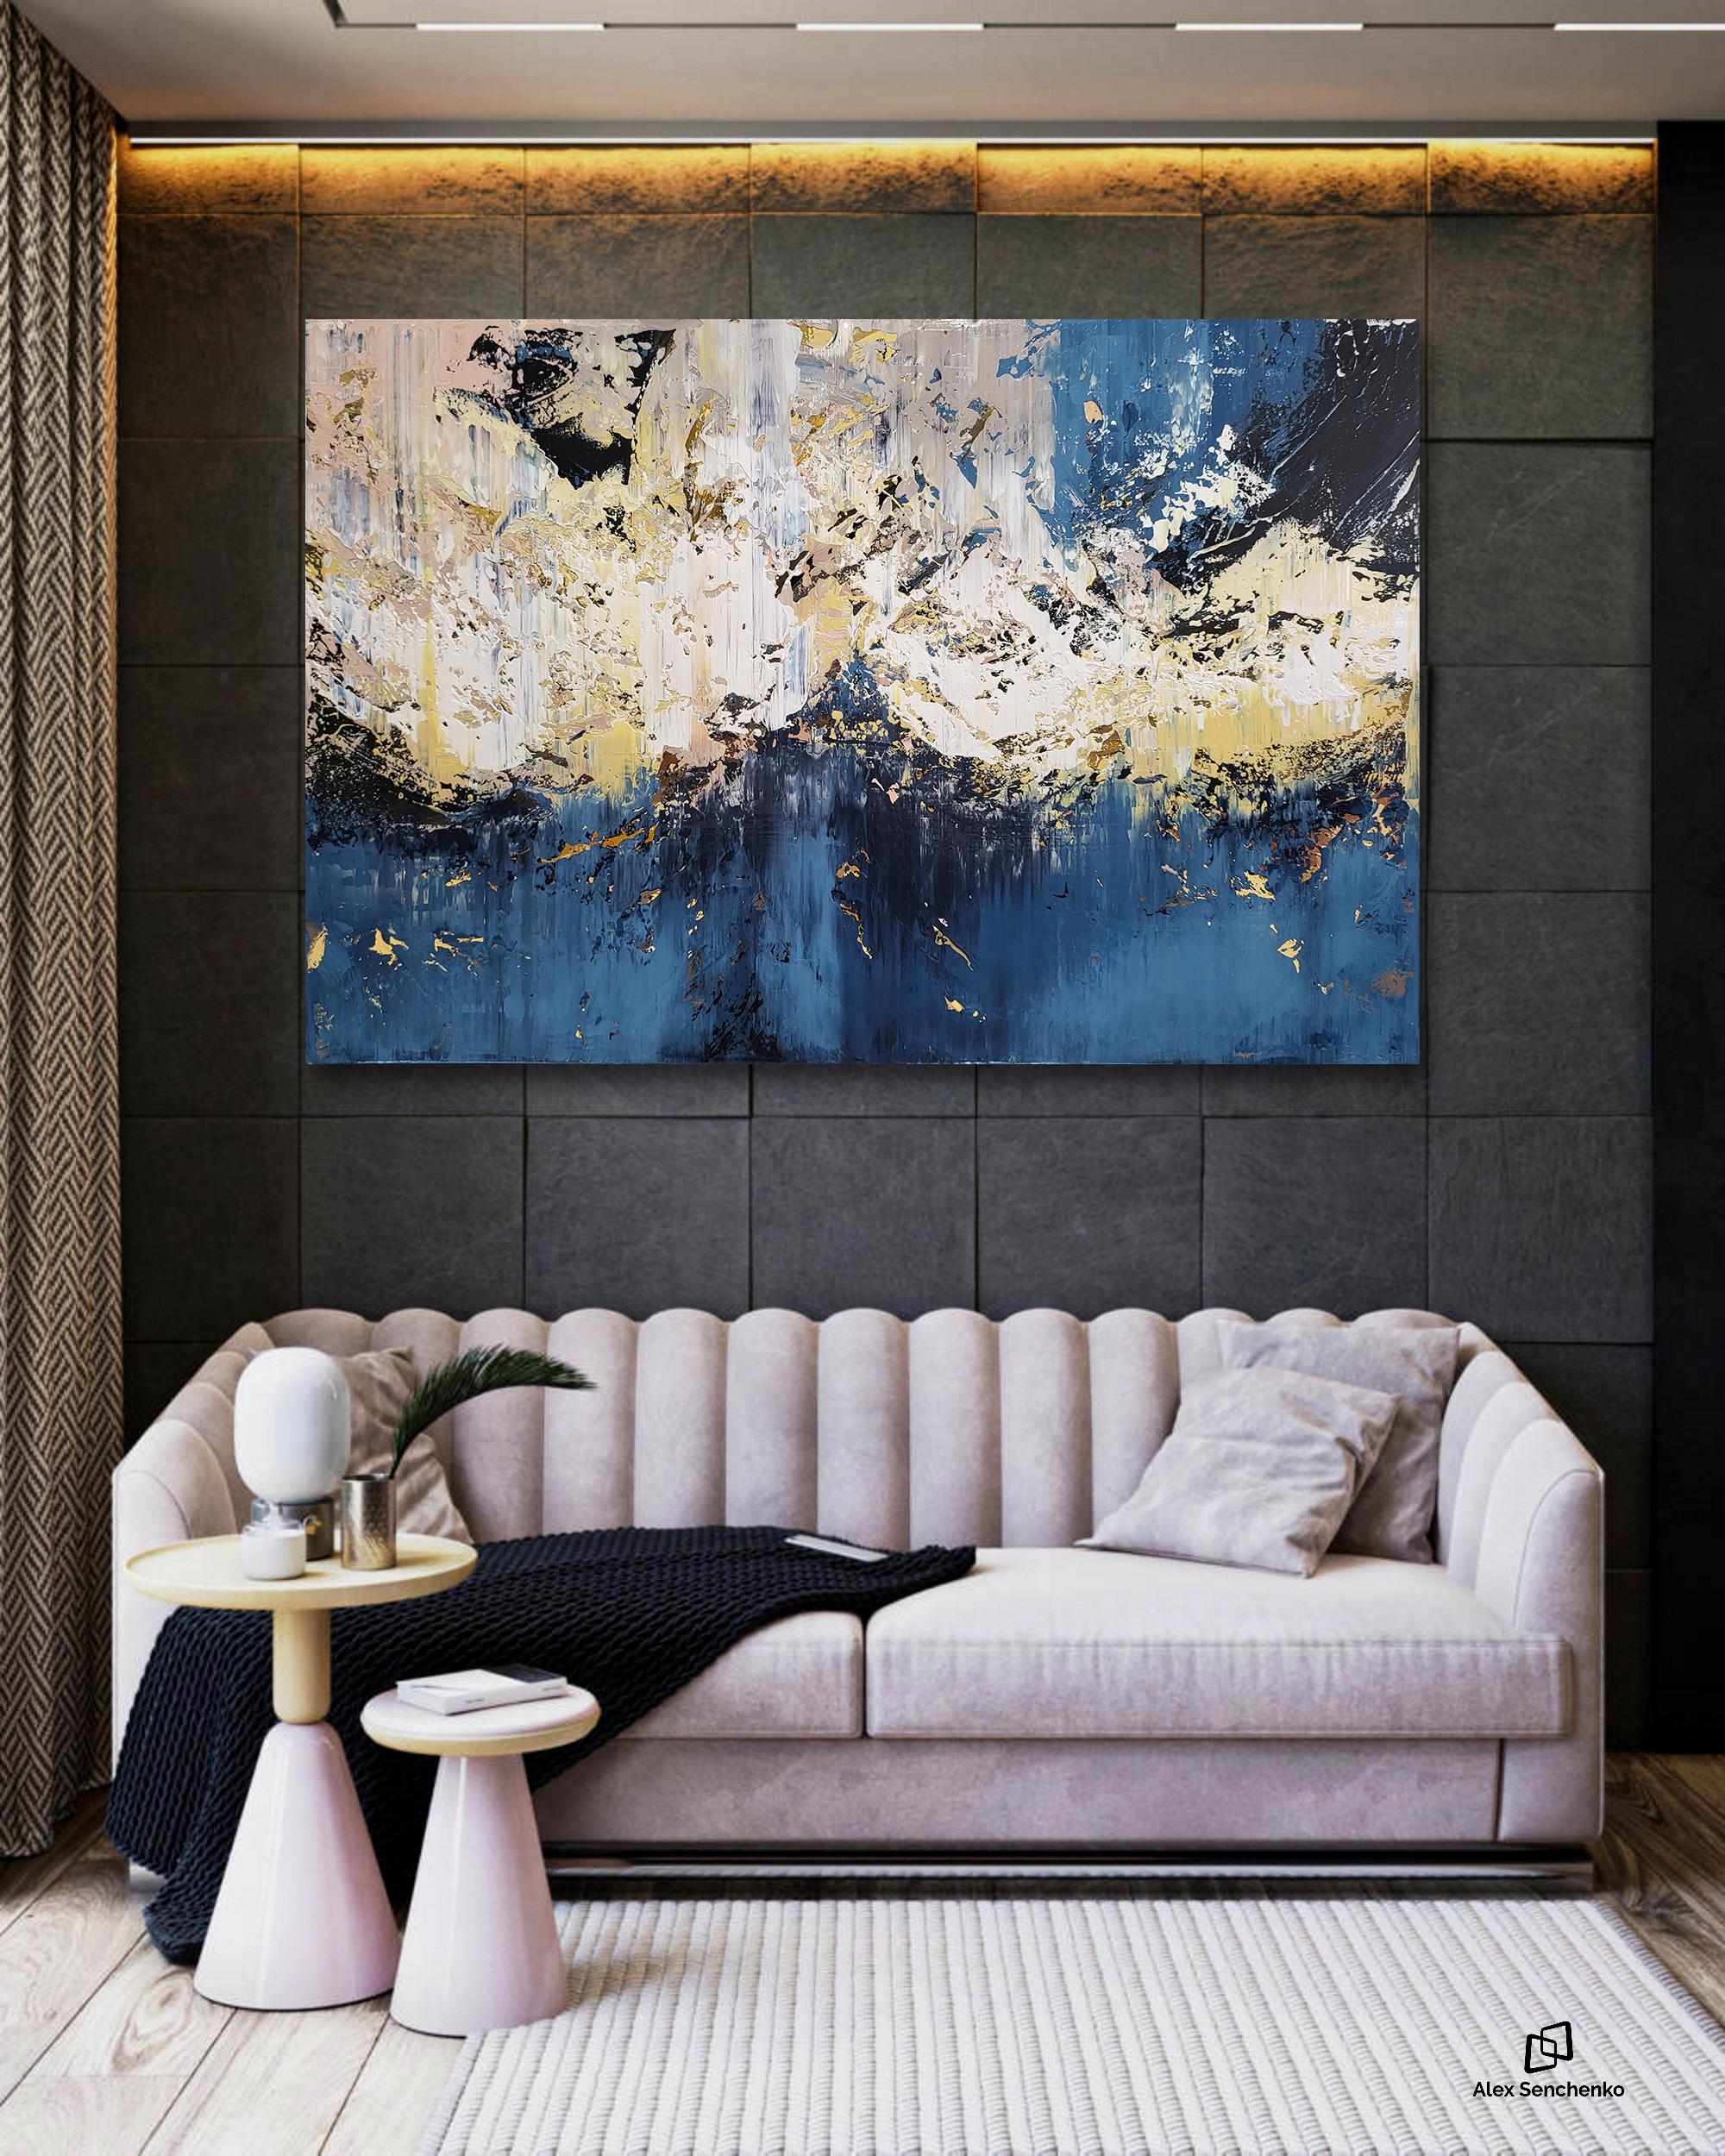 There’s something ethereal, almost magical, about contemporary paintings. The incredible Expressionism bleeds through the canvas, transforming any room into an entirely new experience. Alex Senchenko’s - Abstract 2292 - painting will give your space